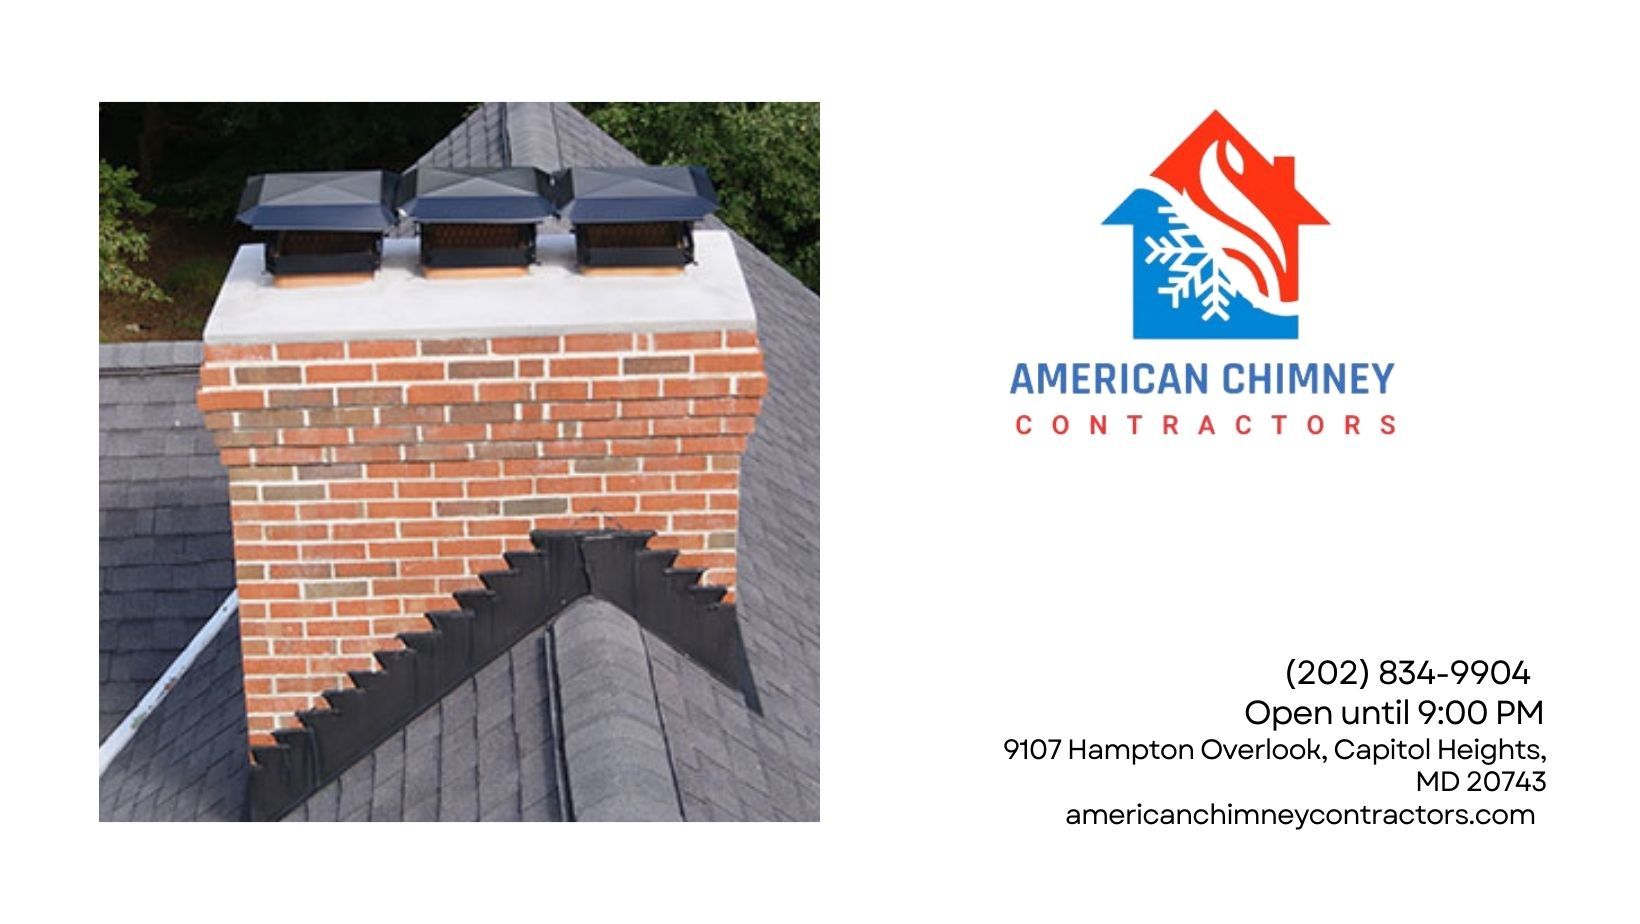 Chimney Installations in Capitol Heights, Maryland